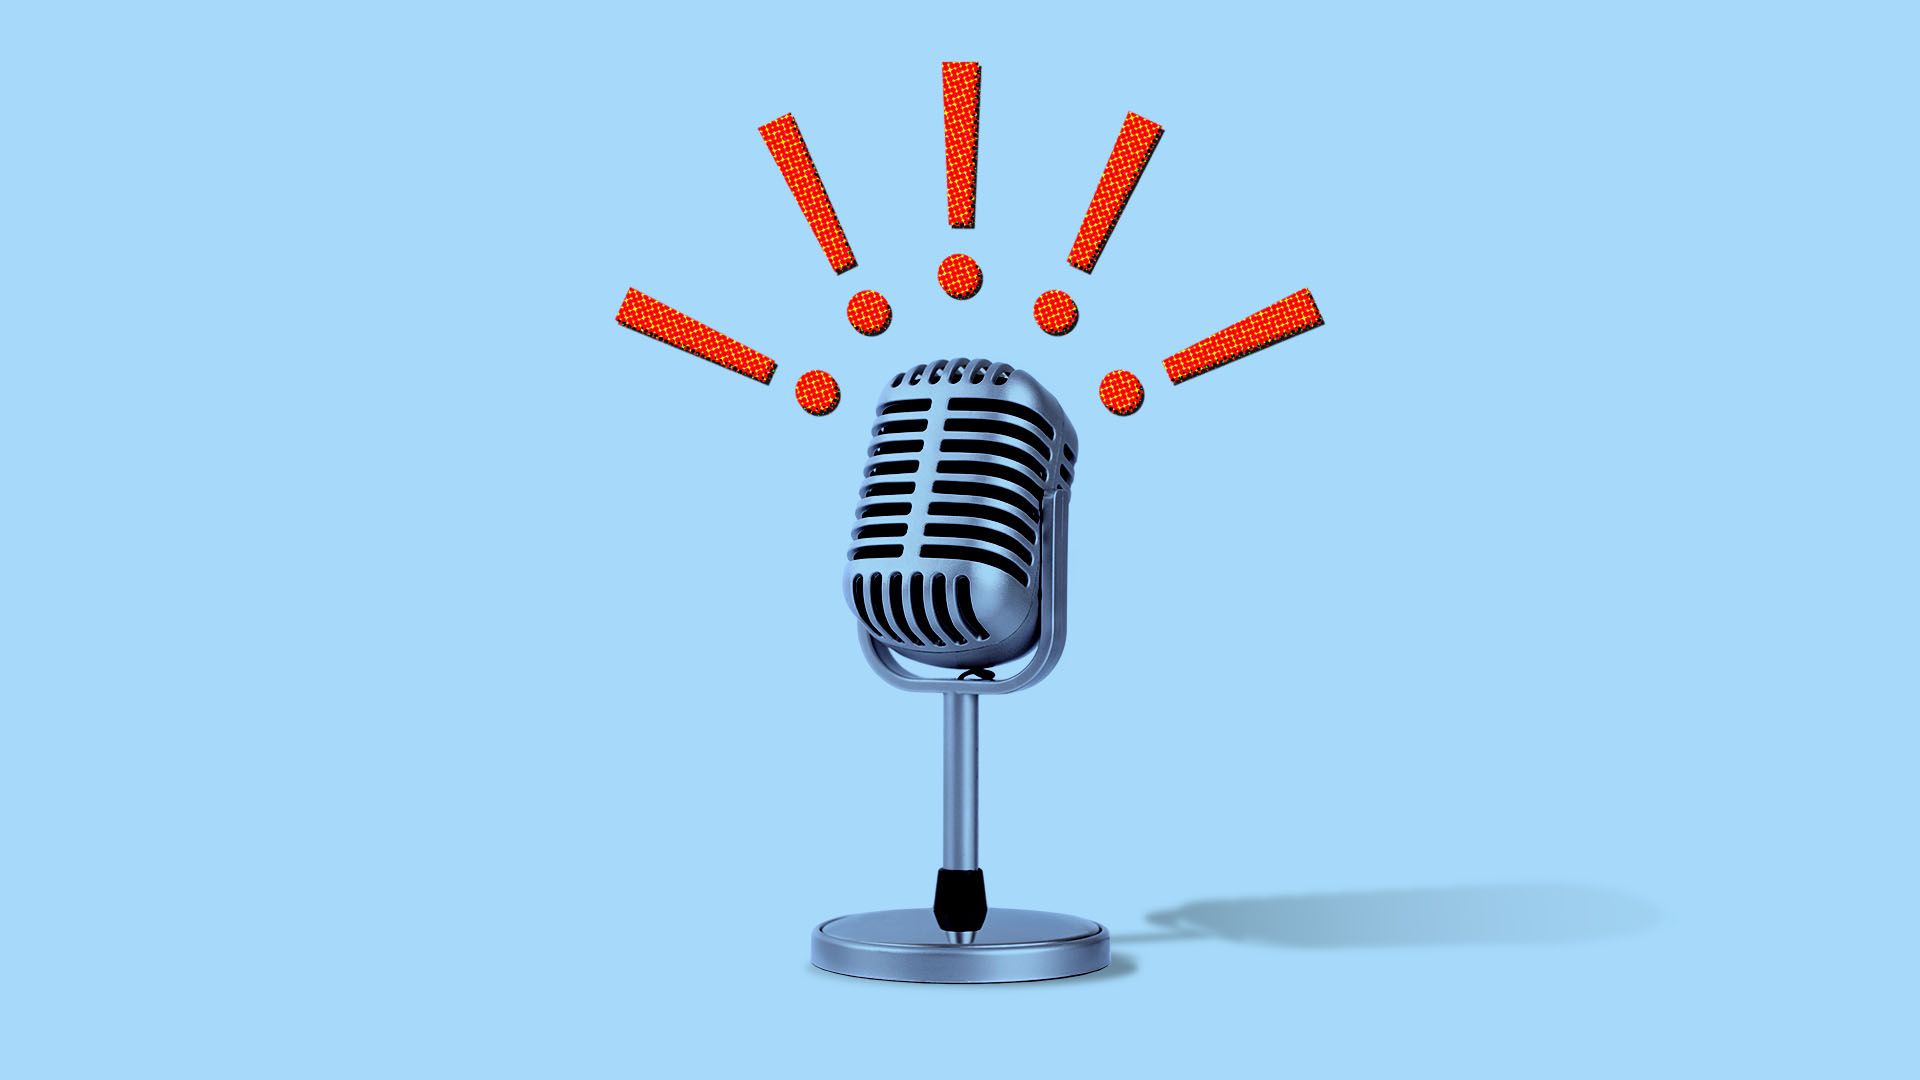 Illustration of a microphone surrounded by exclamation points.